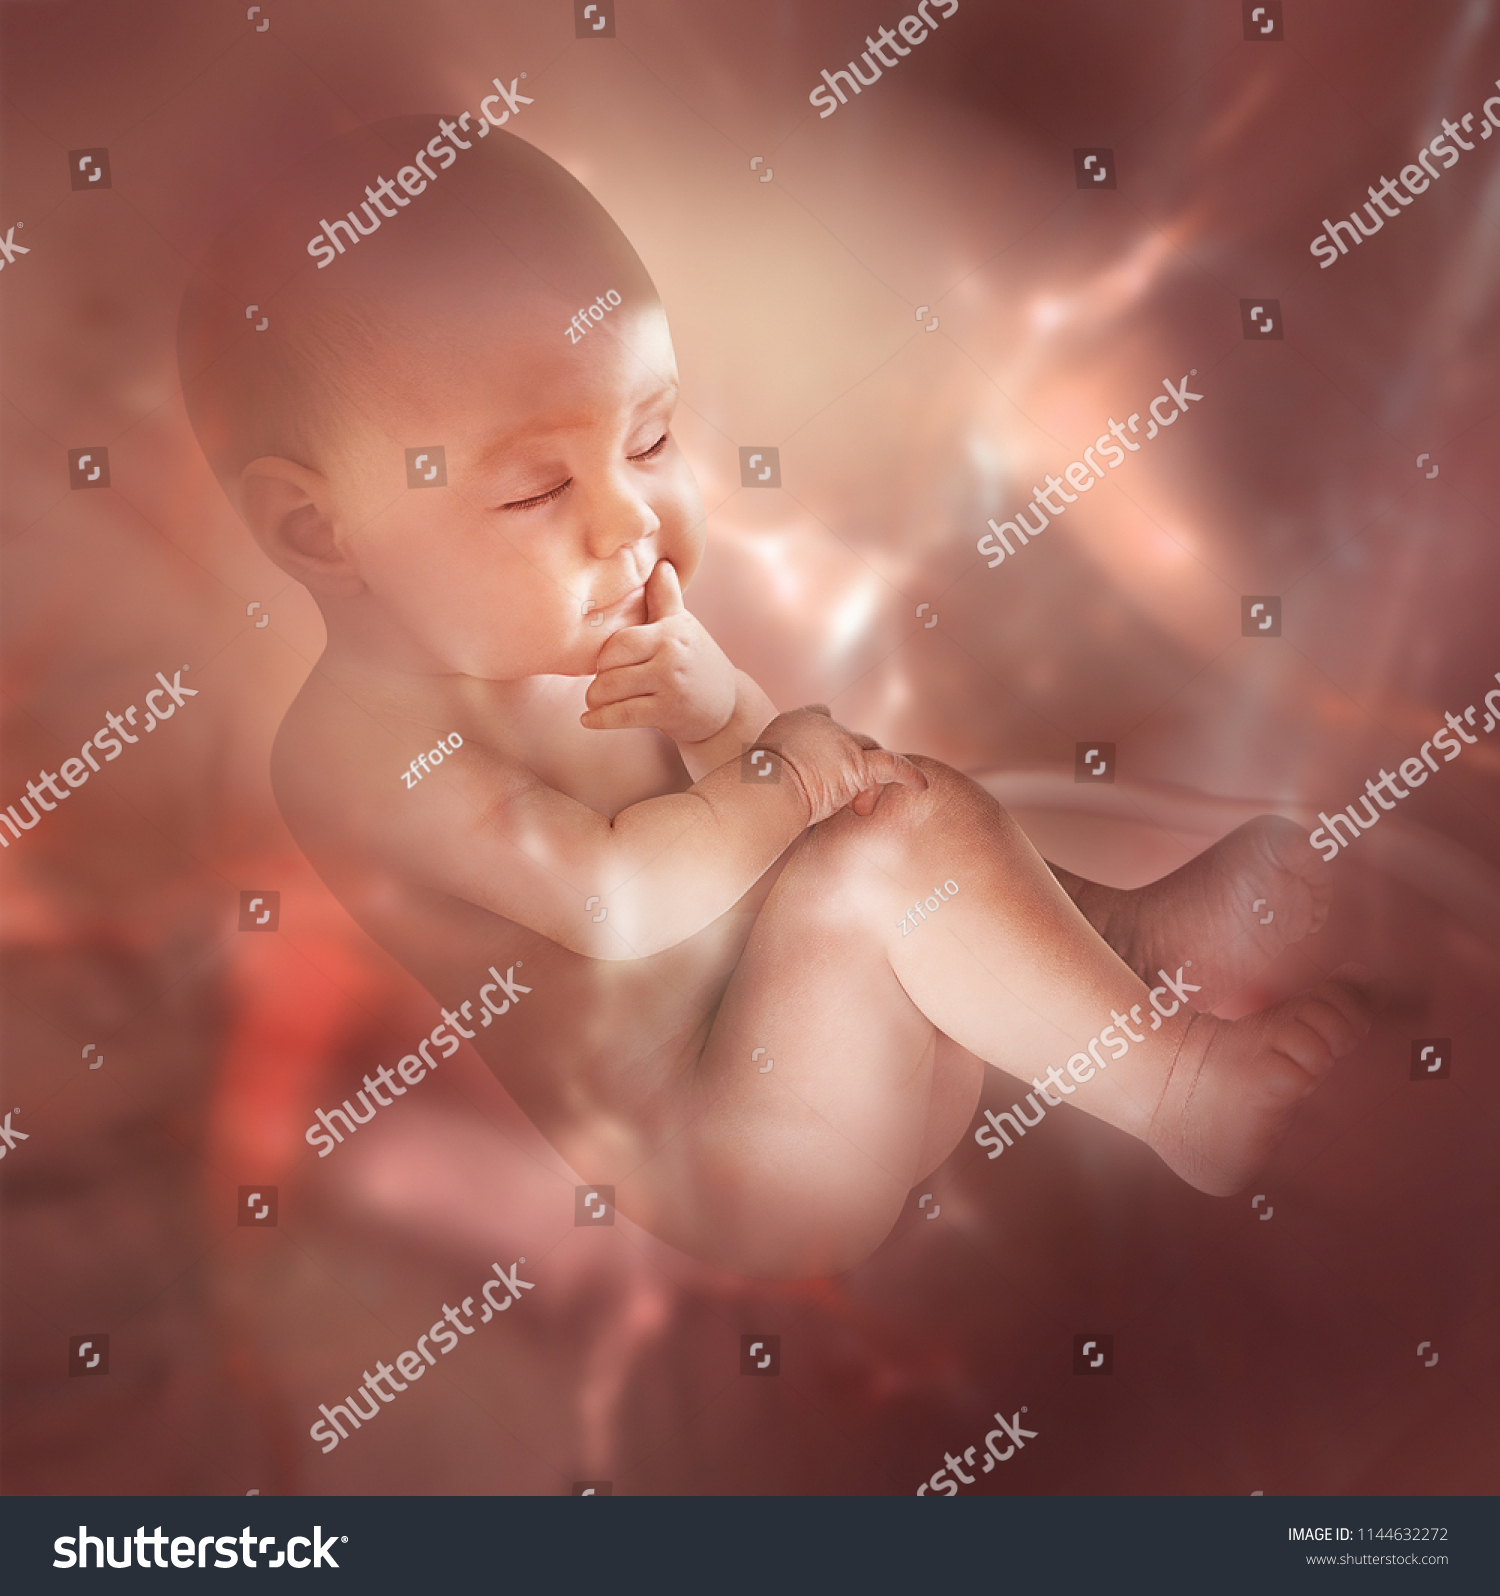 conceptual maternity image with an embryo inside belly during pregnancy #1144632272